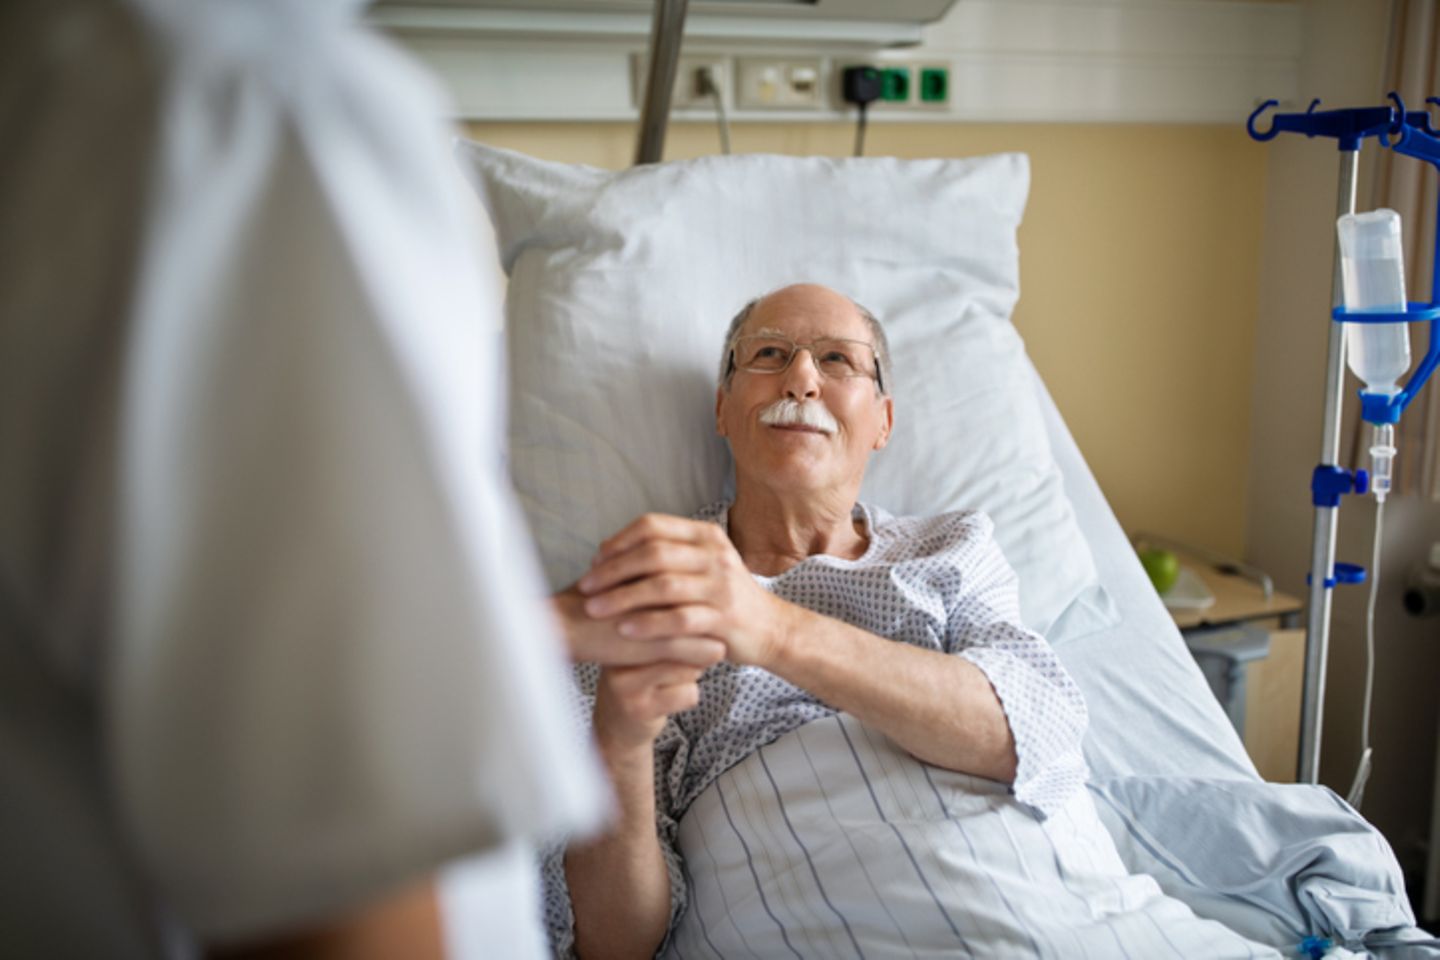 An elderly man lies on a hospital bed and holds a nurse’s hand